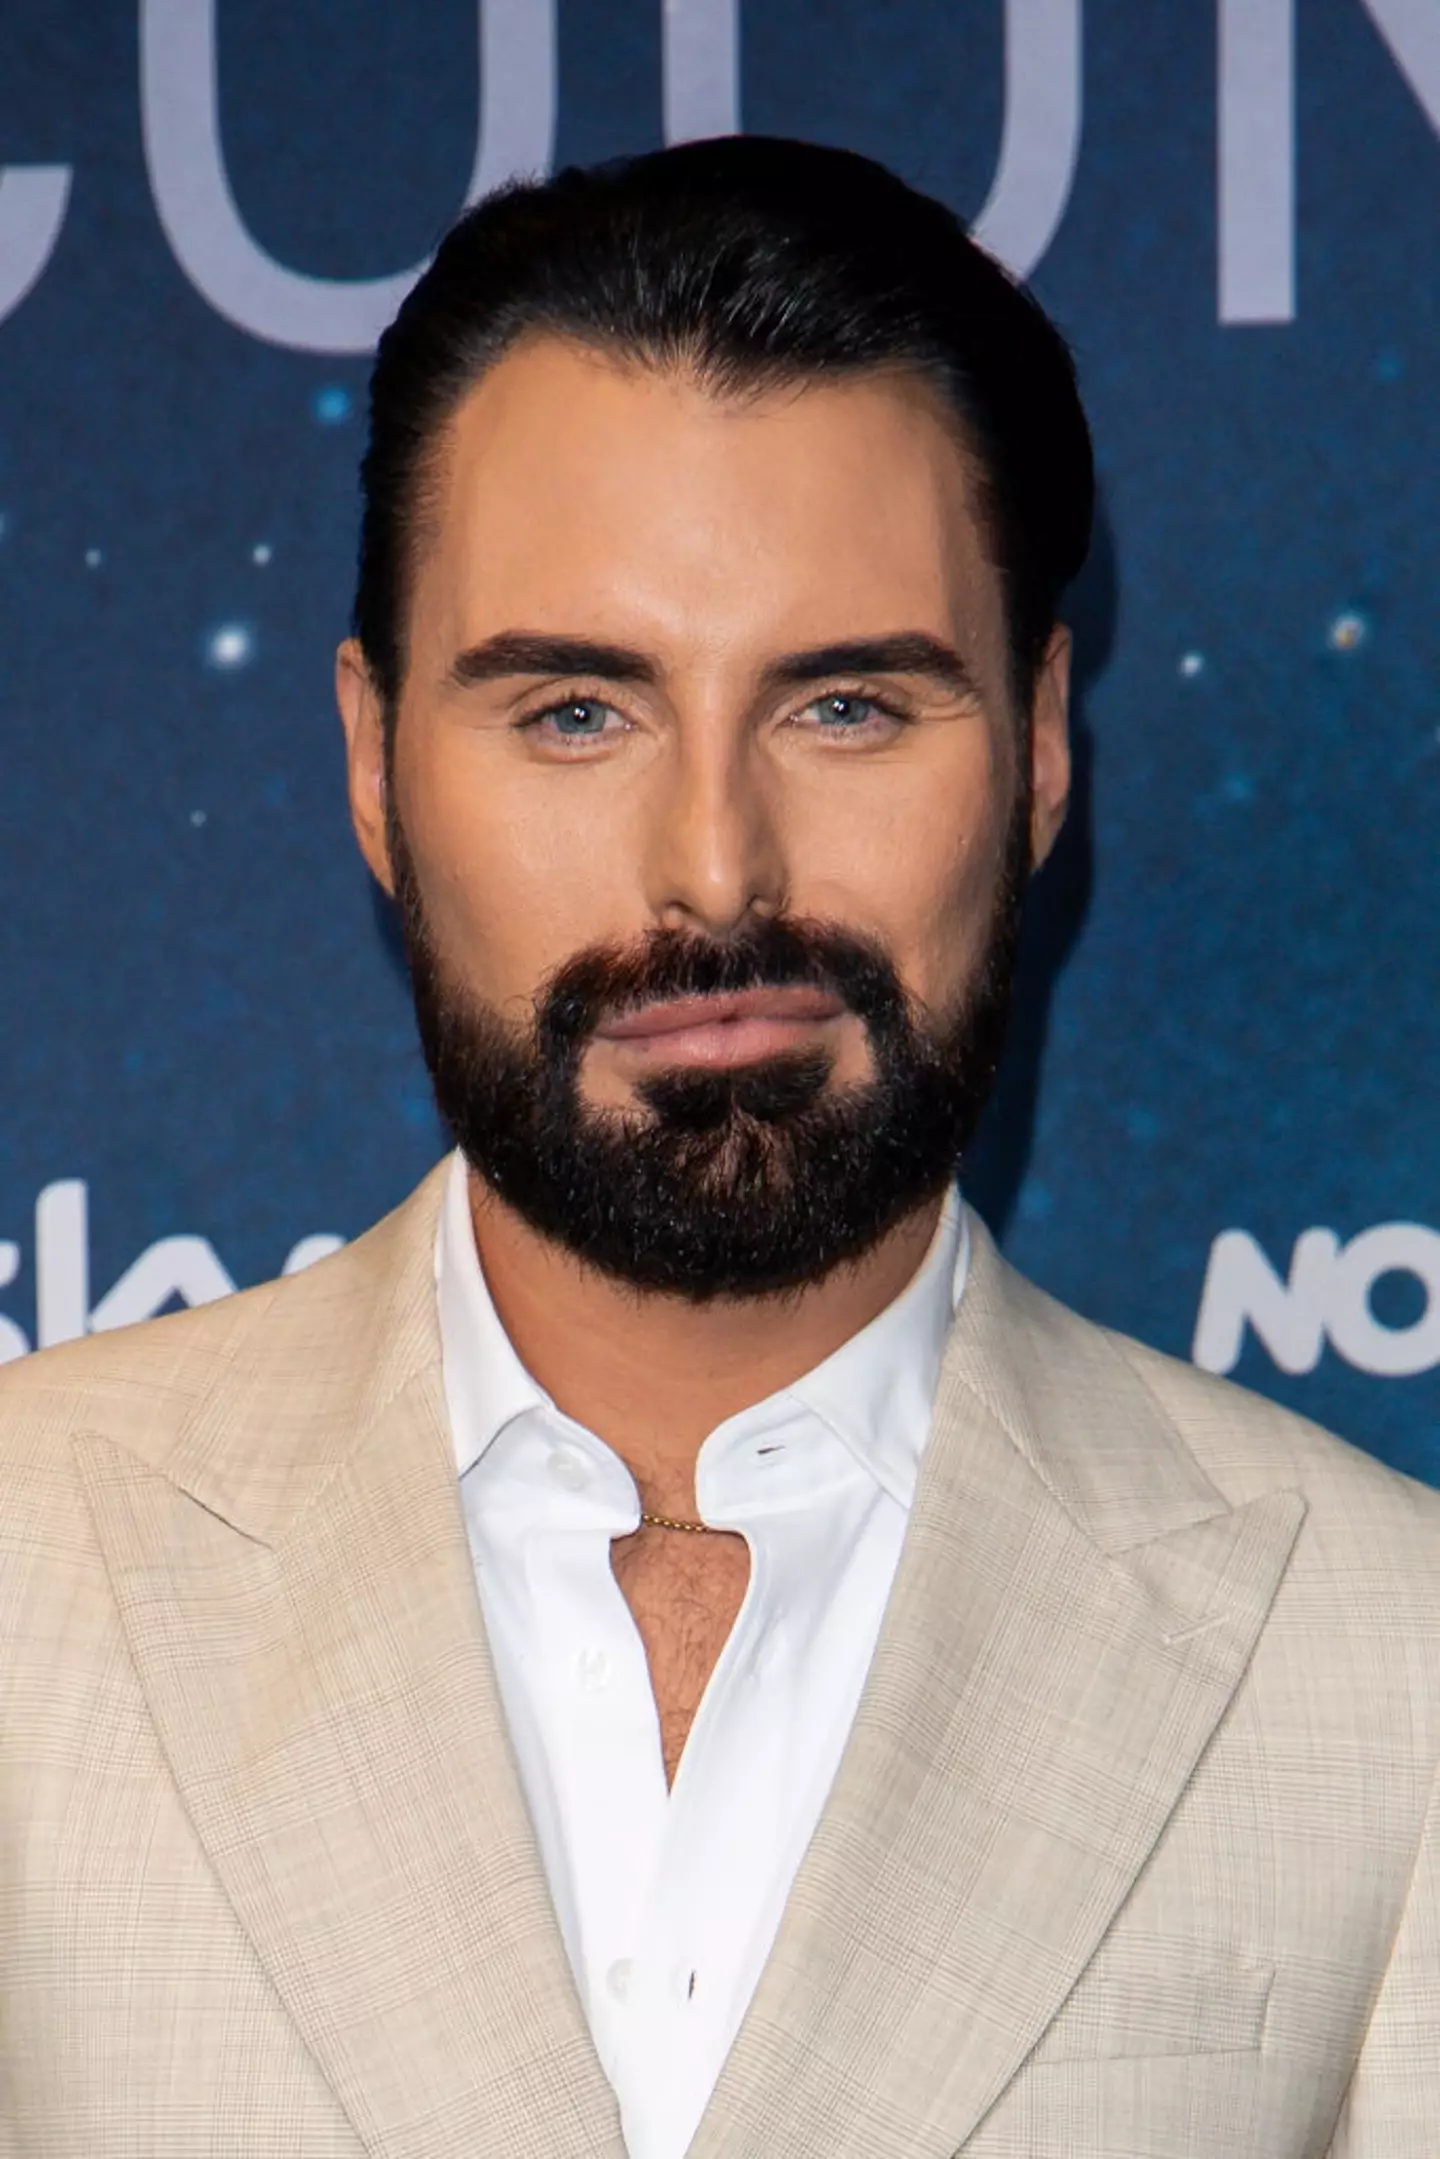 Rylan Clark has responded to the e-fit. (Tristan Fewings/Getty Images)